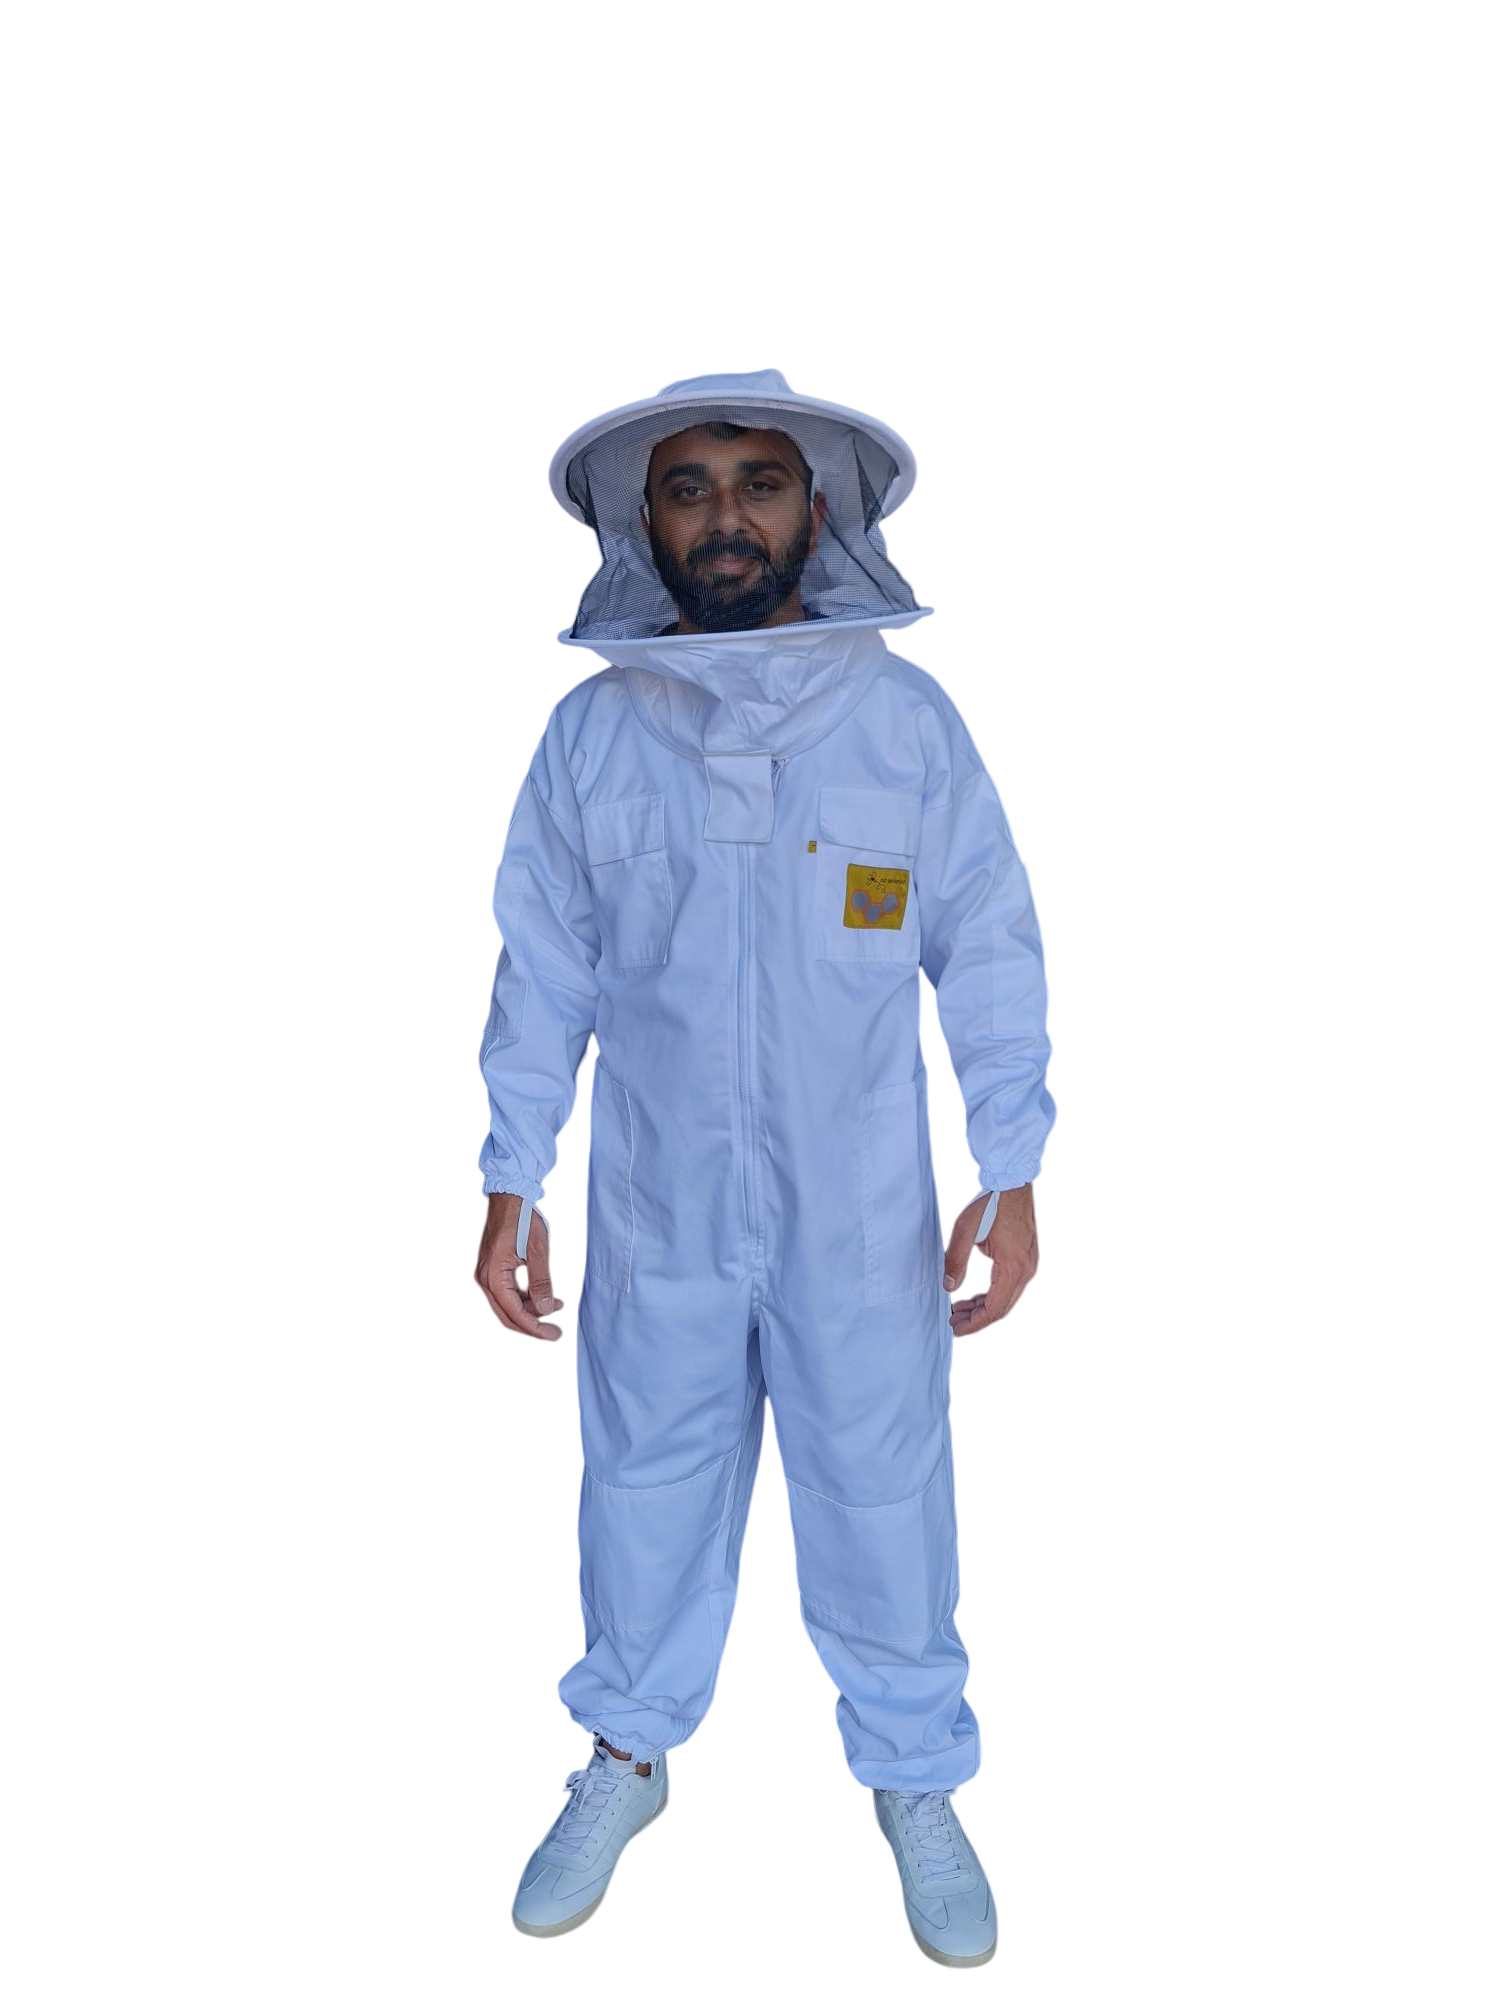 OZ APIARIST Heavy Duty Beekeeping Suit With Round Brim Hat & Optional Gloves